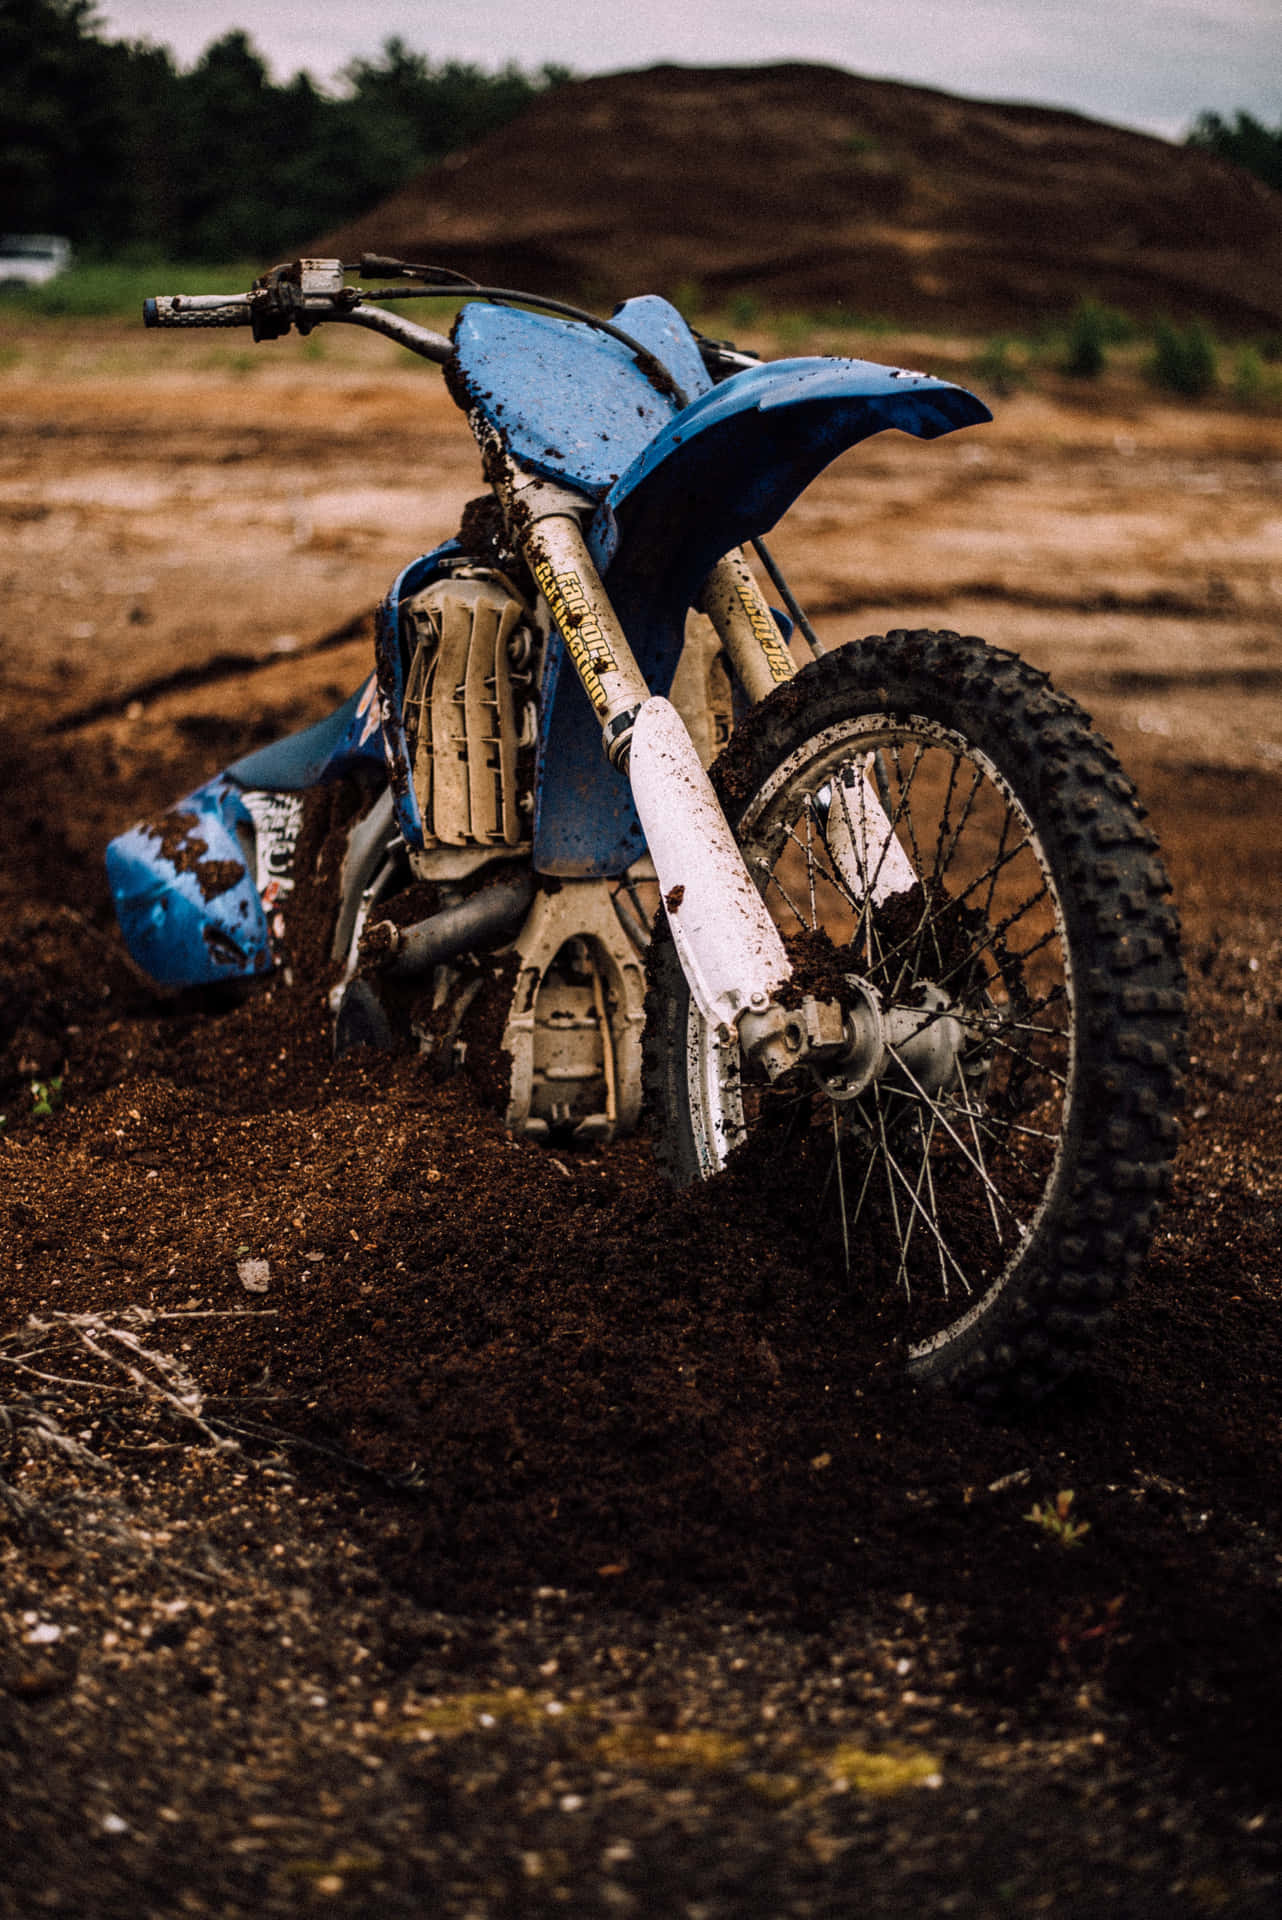 A Blue Dirt Bike Laying In The Dirt